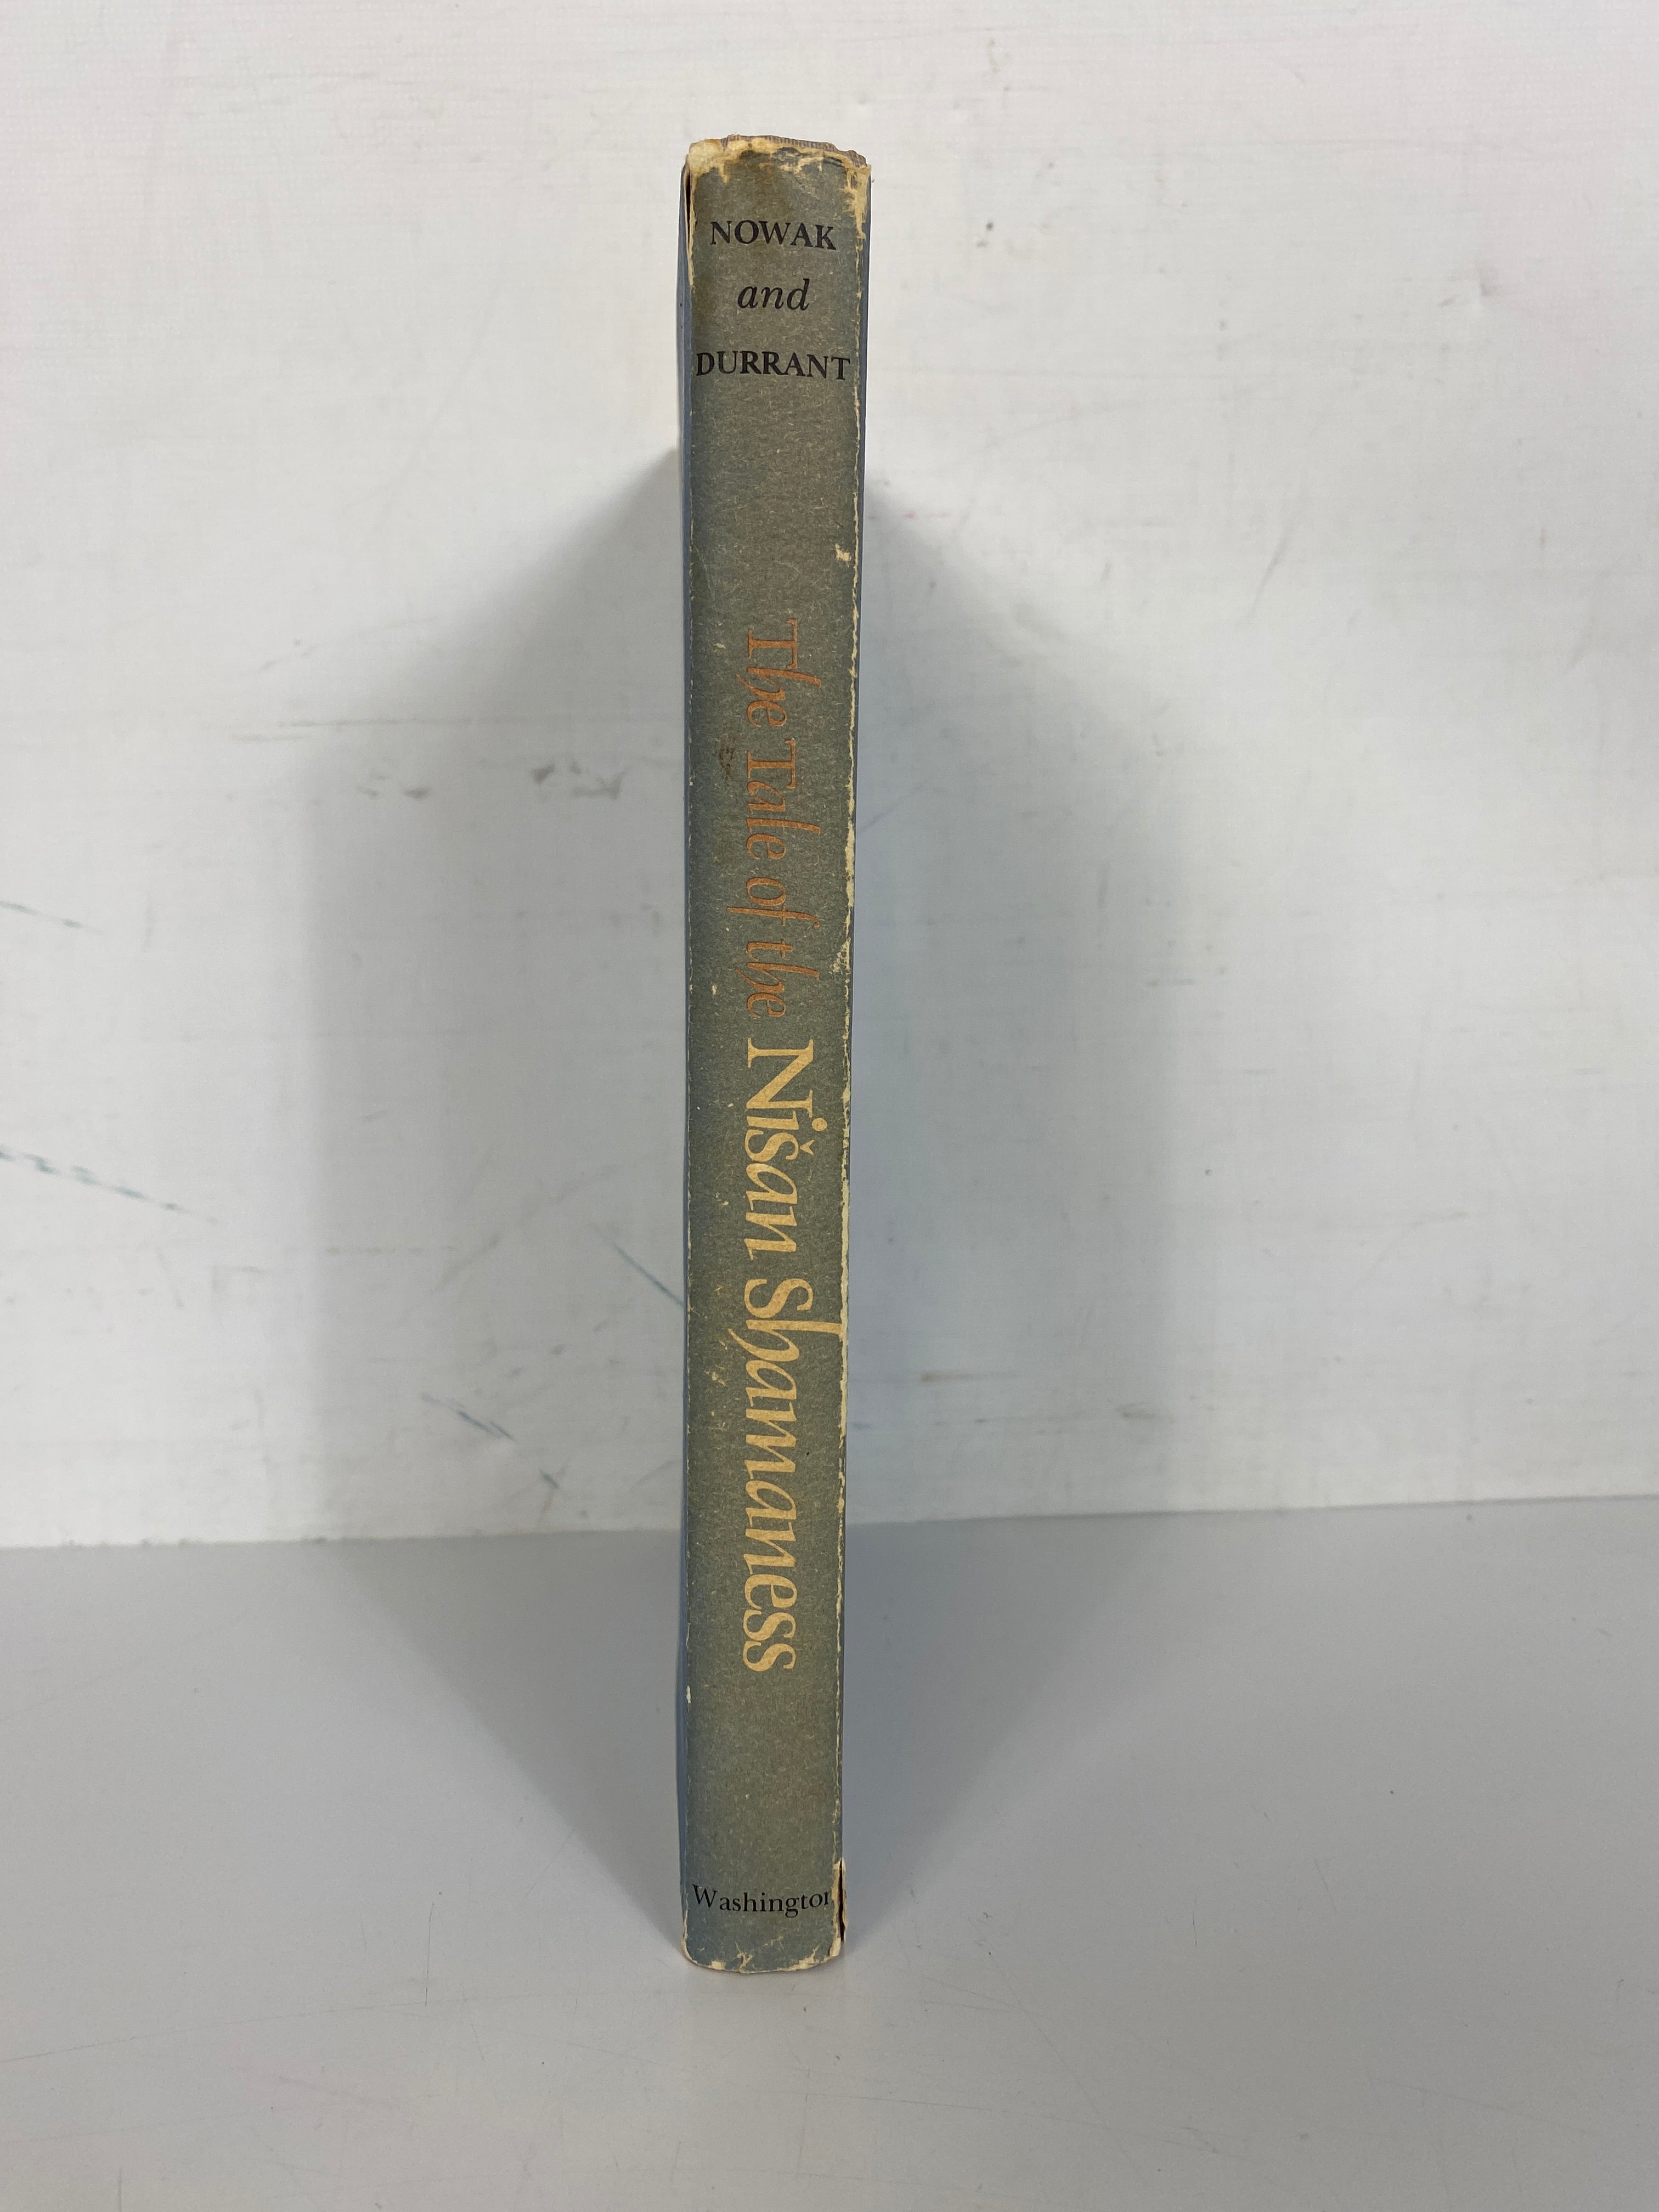 The Tale of the Nisan Shamaness by Nowak and Durrant 1977 First Edition HC DJ